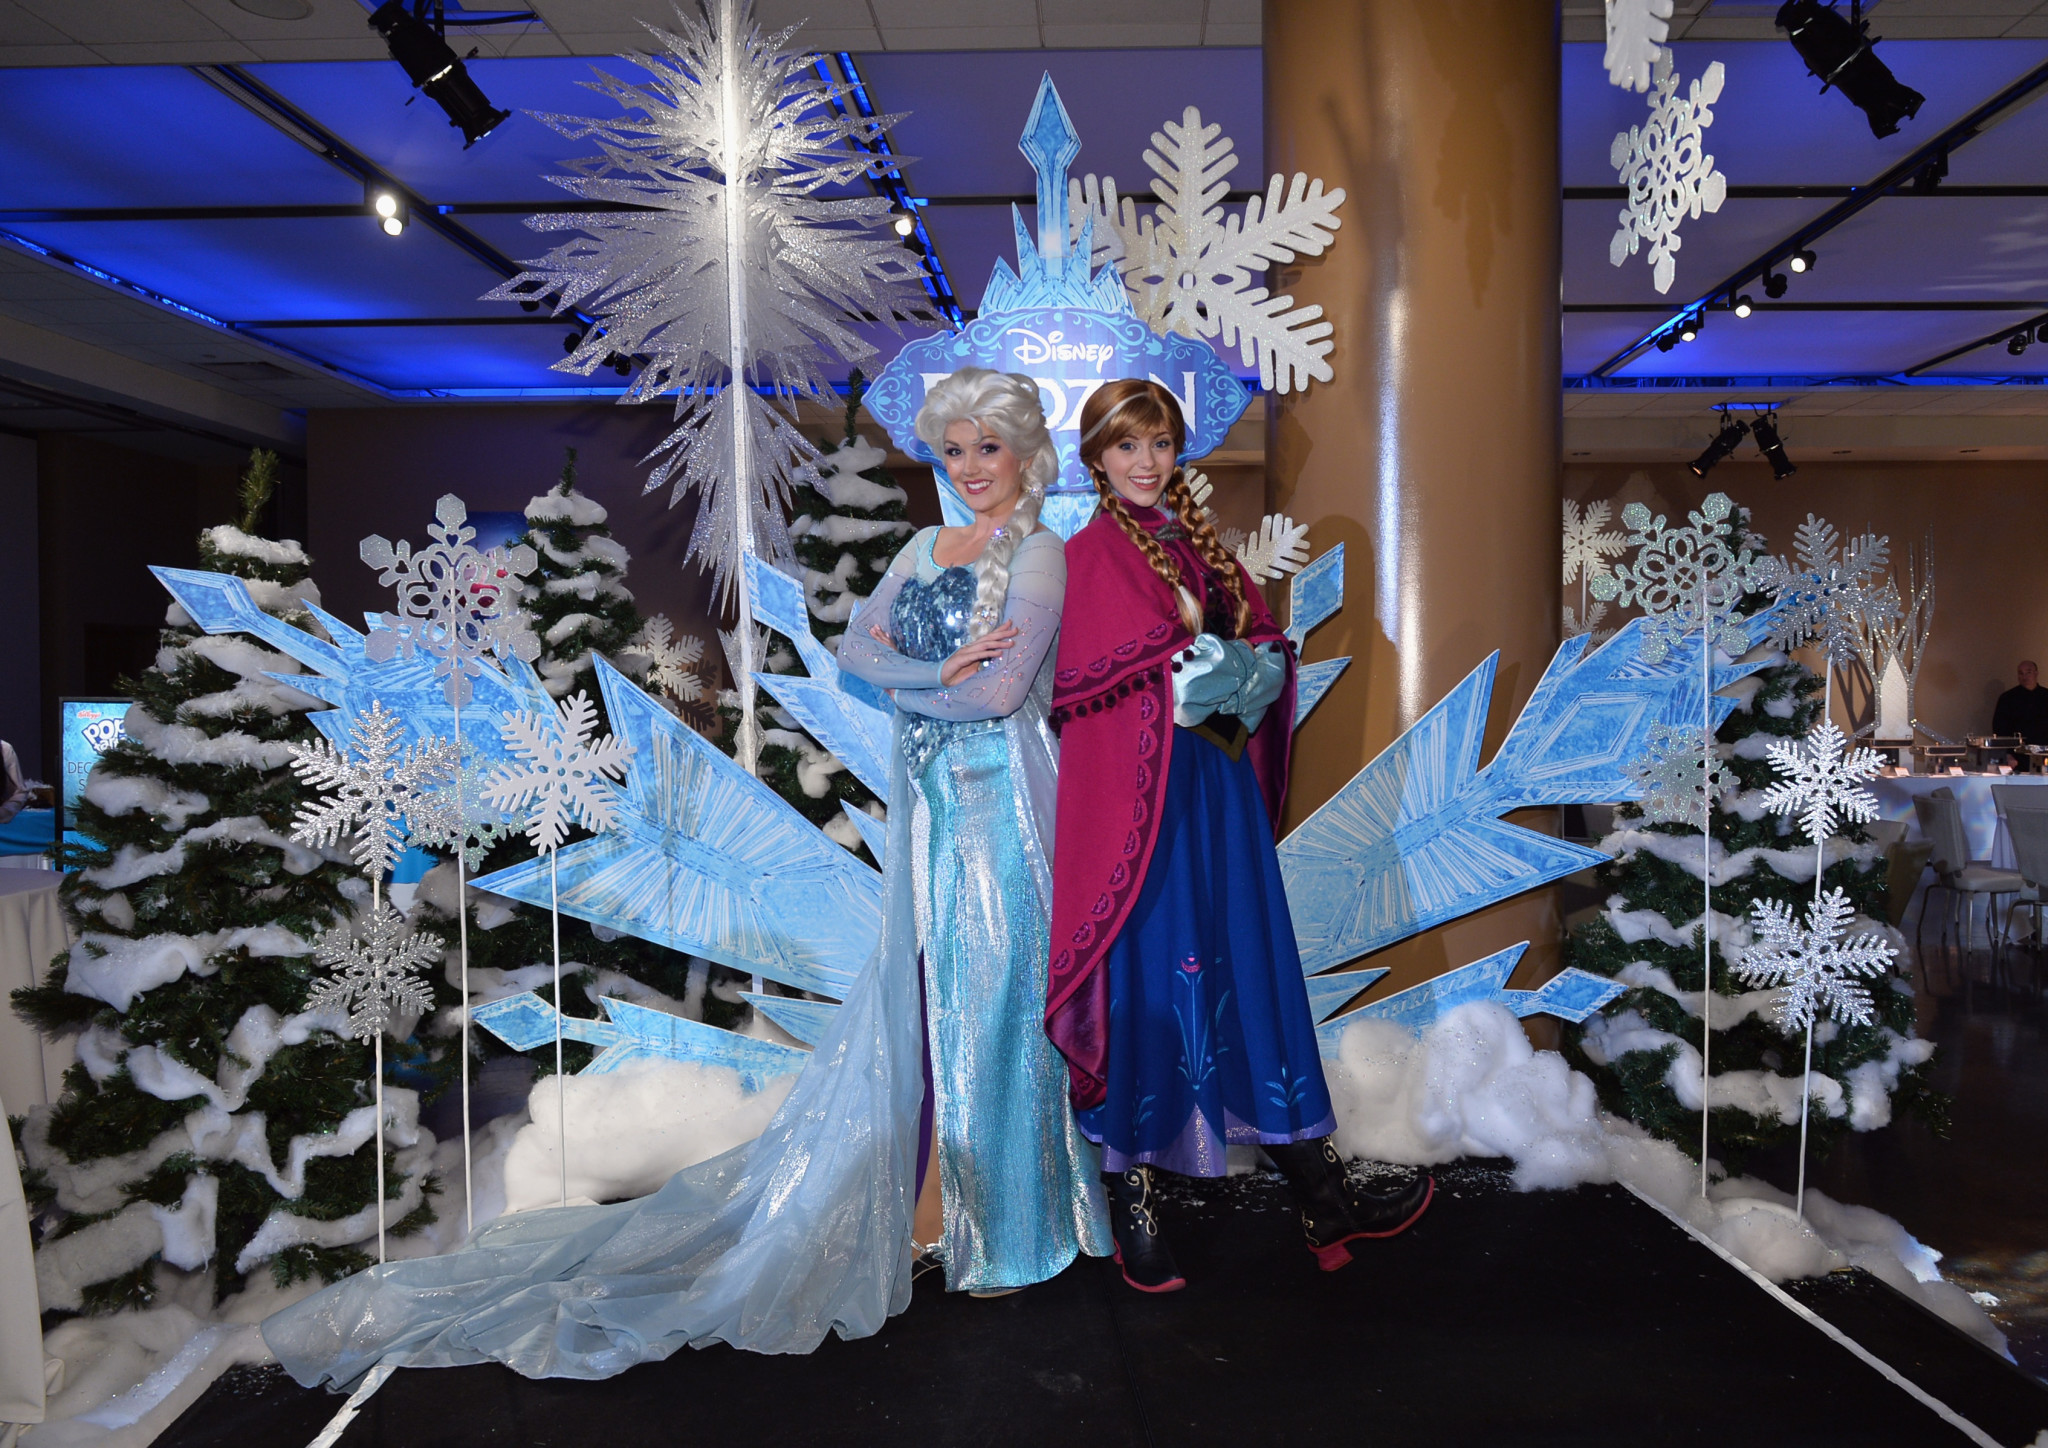 Anna and Elsa to Join the Festival of Fantasy Parade at Walt Disney World